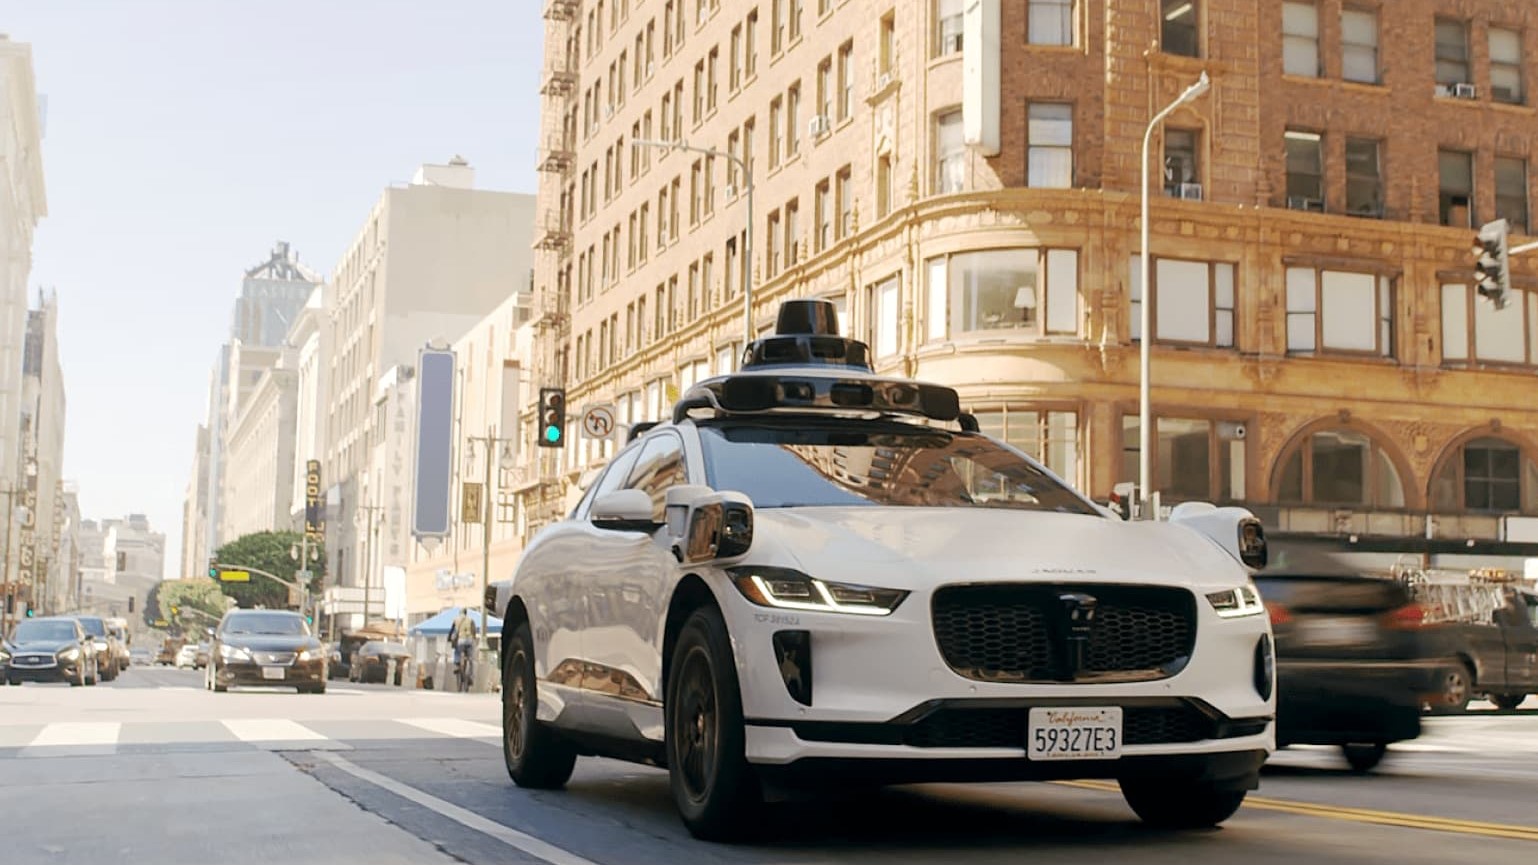 Waymo has asked California authorities for permission to launch a commercial drone taxi service in Los Angeles